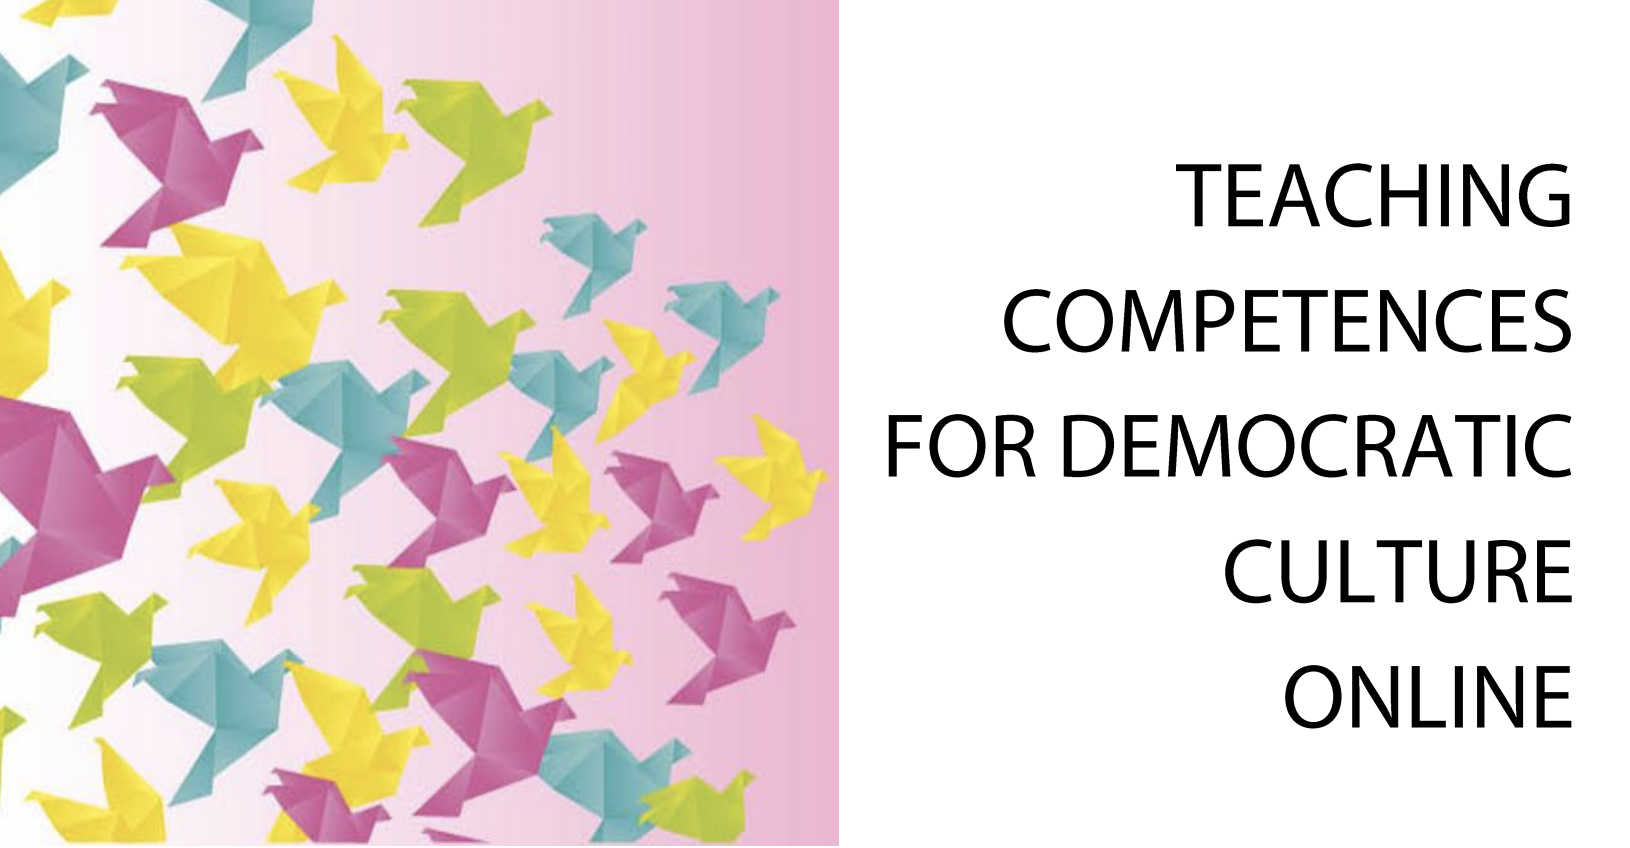 Manual for teachers – Teaching Competences for Democratic Culture online